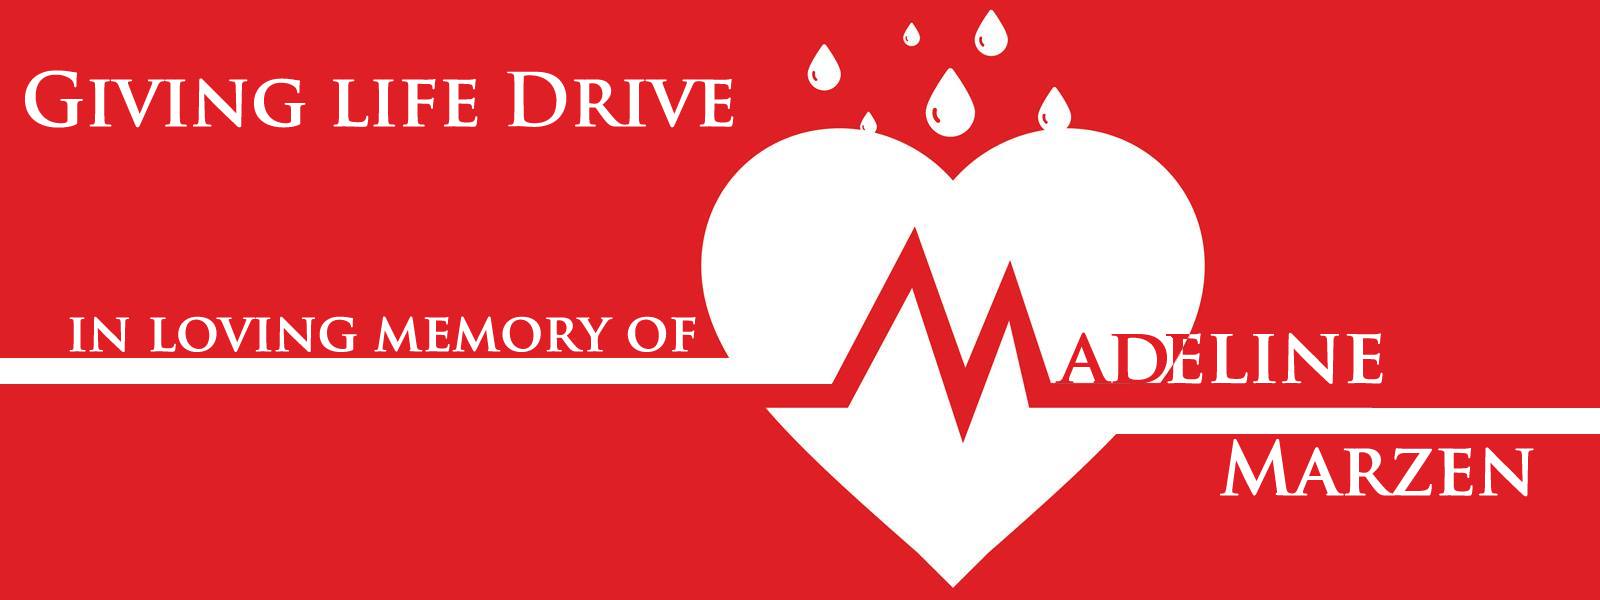 Alliance Realty Hosting Memorial Blood Drive